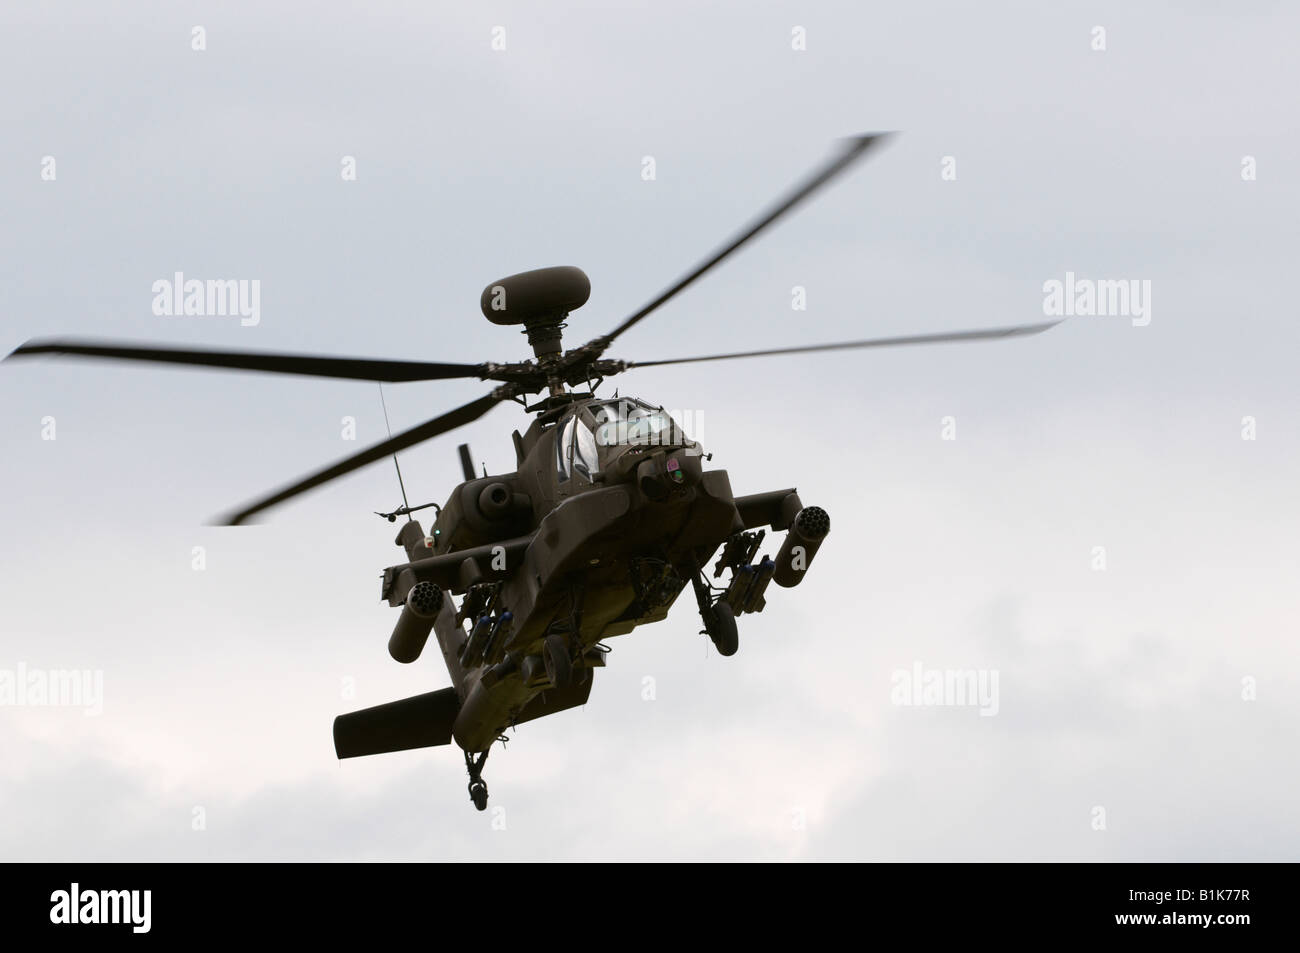 Boeing AH-64D Longbow Apache Helicopter Kemble Air Show 2008 Stock Photo